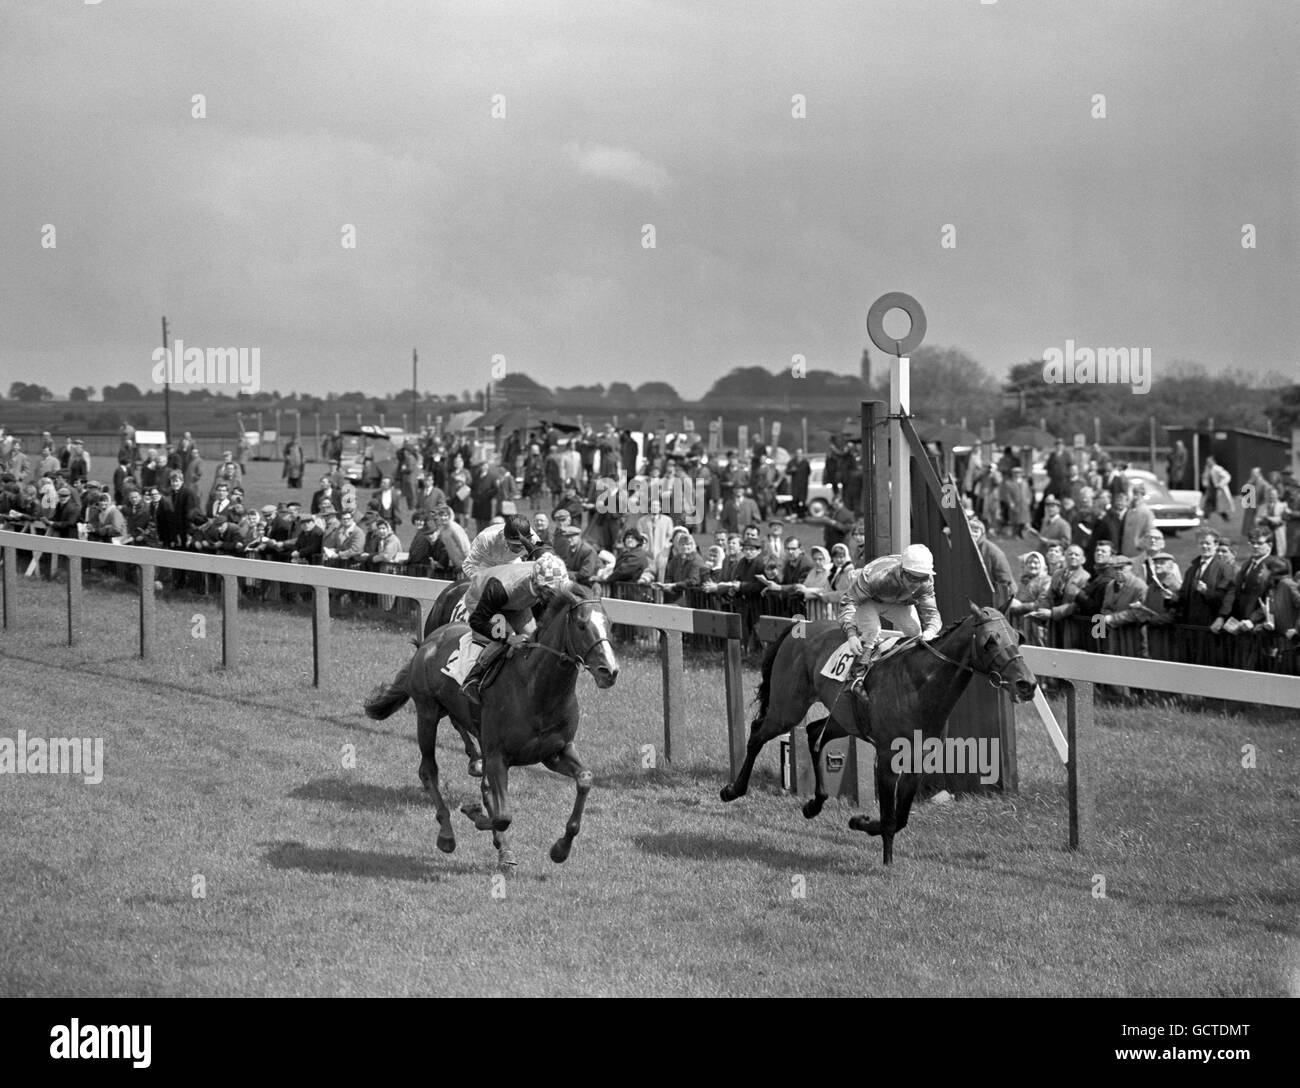 Horse Racing - The Bath May handicap Stakes - Bath Racecourse. Emerald Cross, no 16, Des Cullen up, right, winning from Scriventon, no 2, ridden by Joe Mercer. Stock Photo